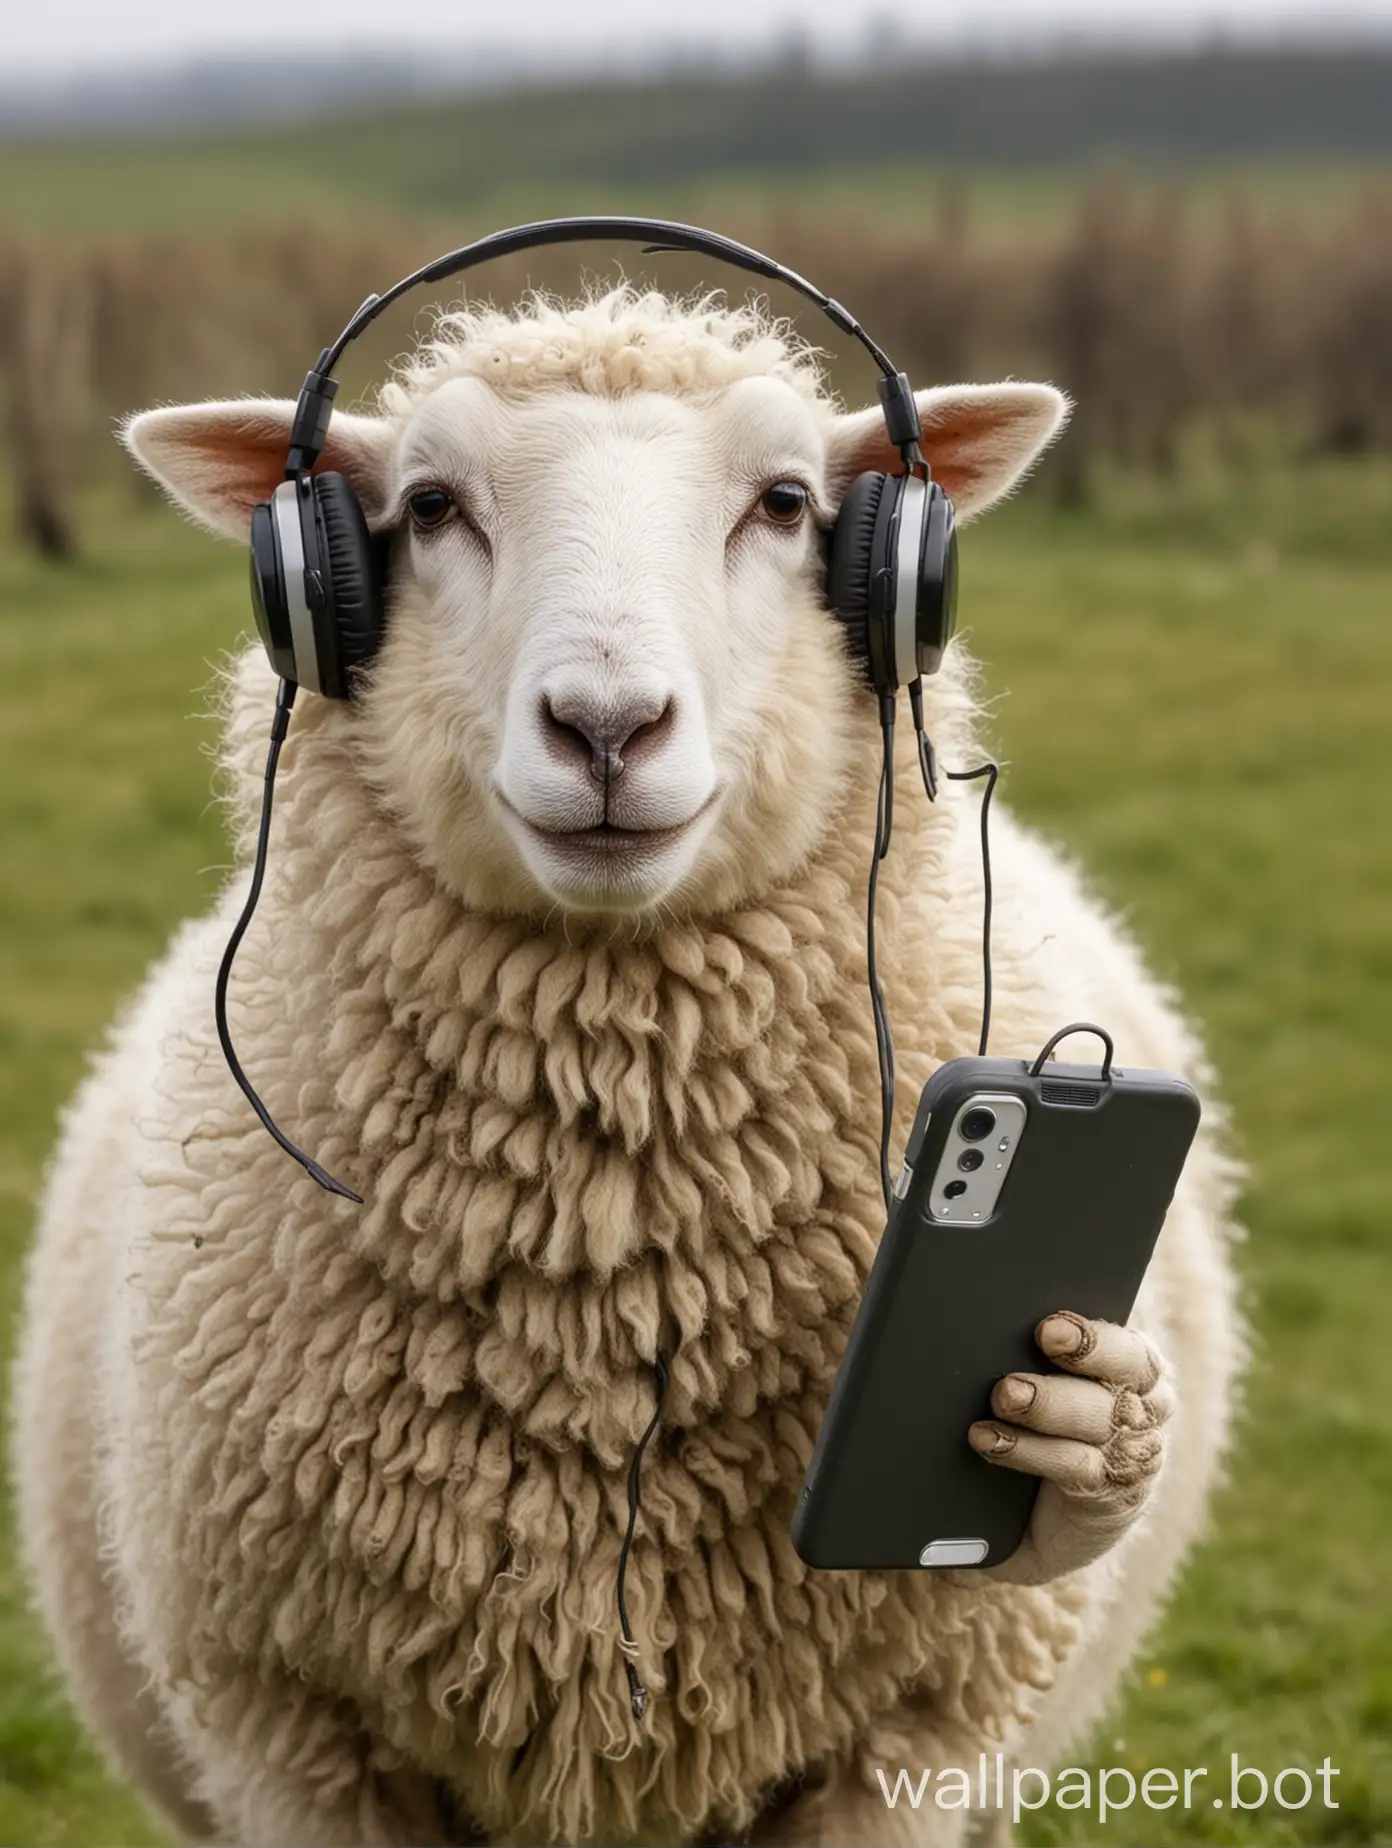 Sheep-with-Mobile-Phone-and-Headphones